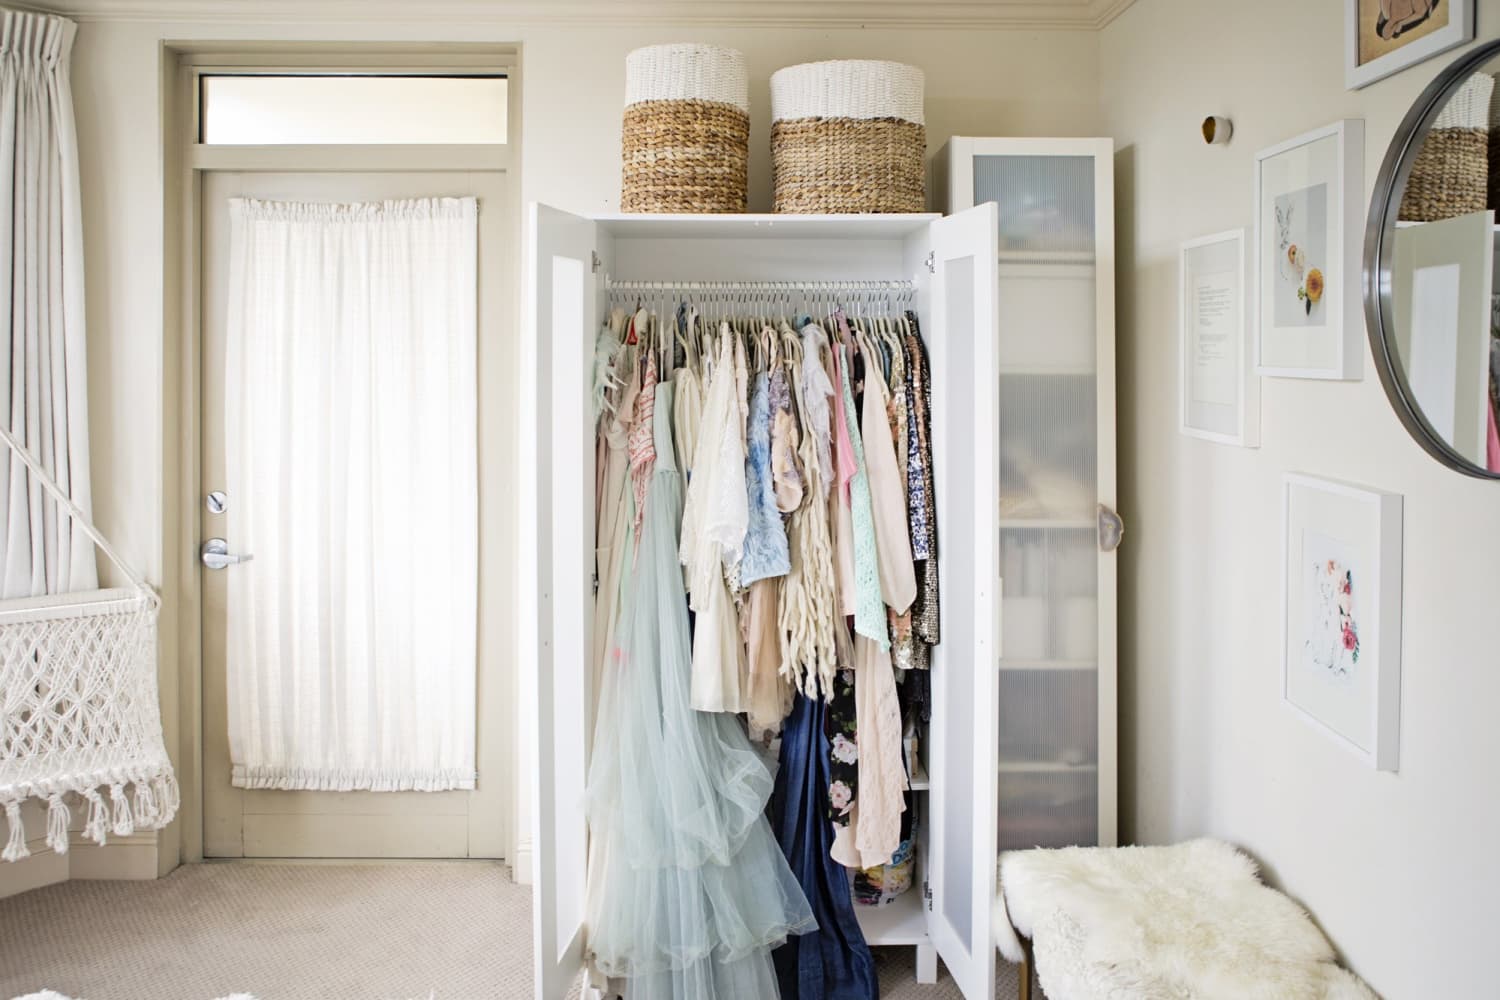 7 Small Bedroom Closet Organization Tips From Professionals